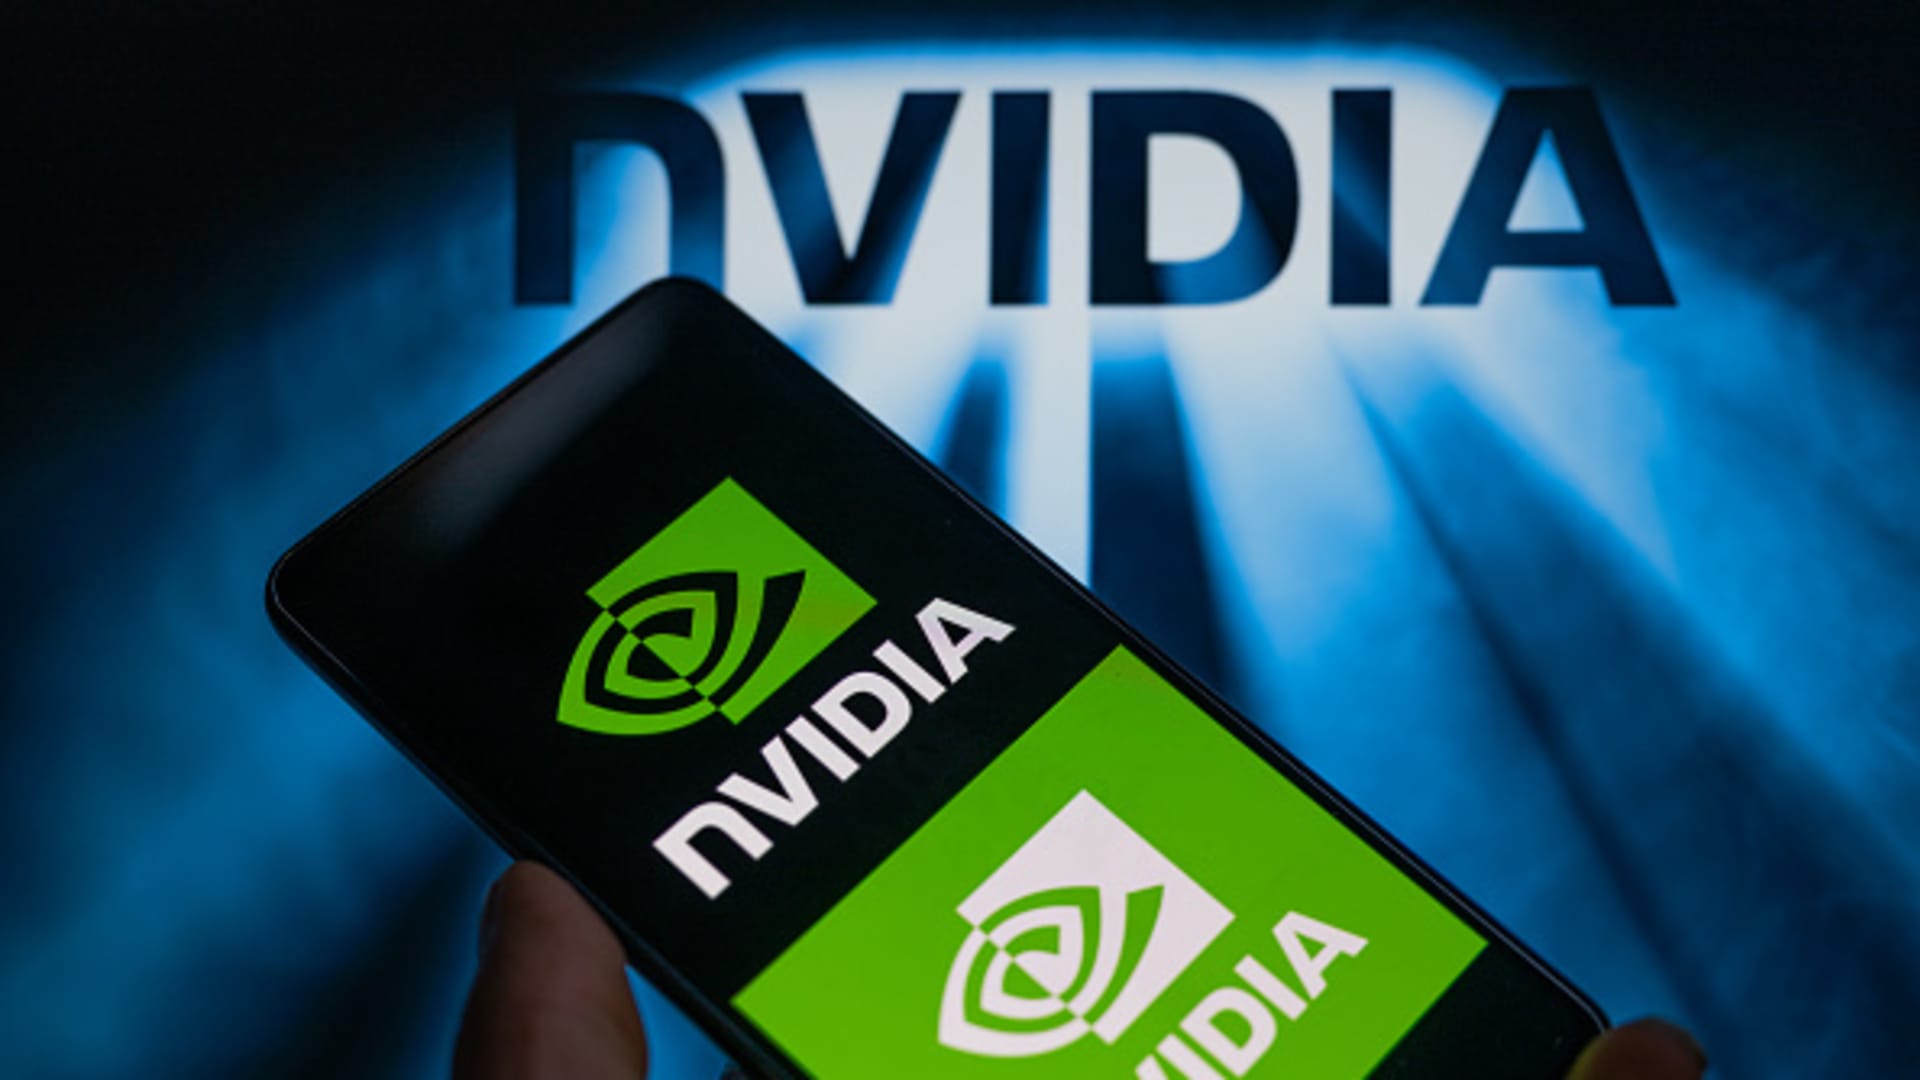 Nvidia's Data Center business is booming, up more than 400% since last year to .4 billion in fourth-quarter sales